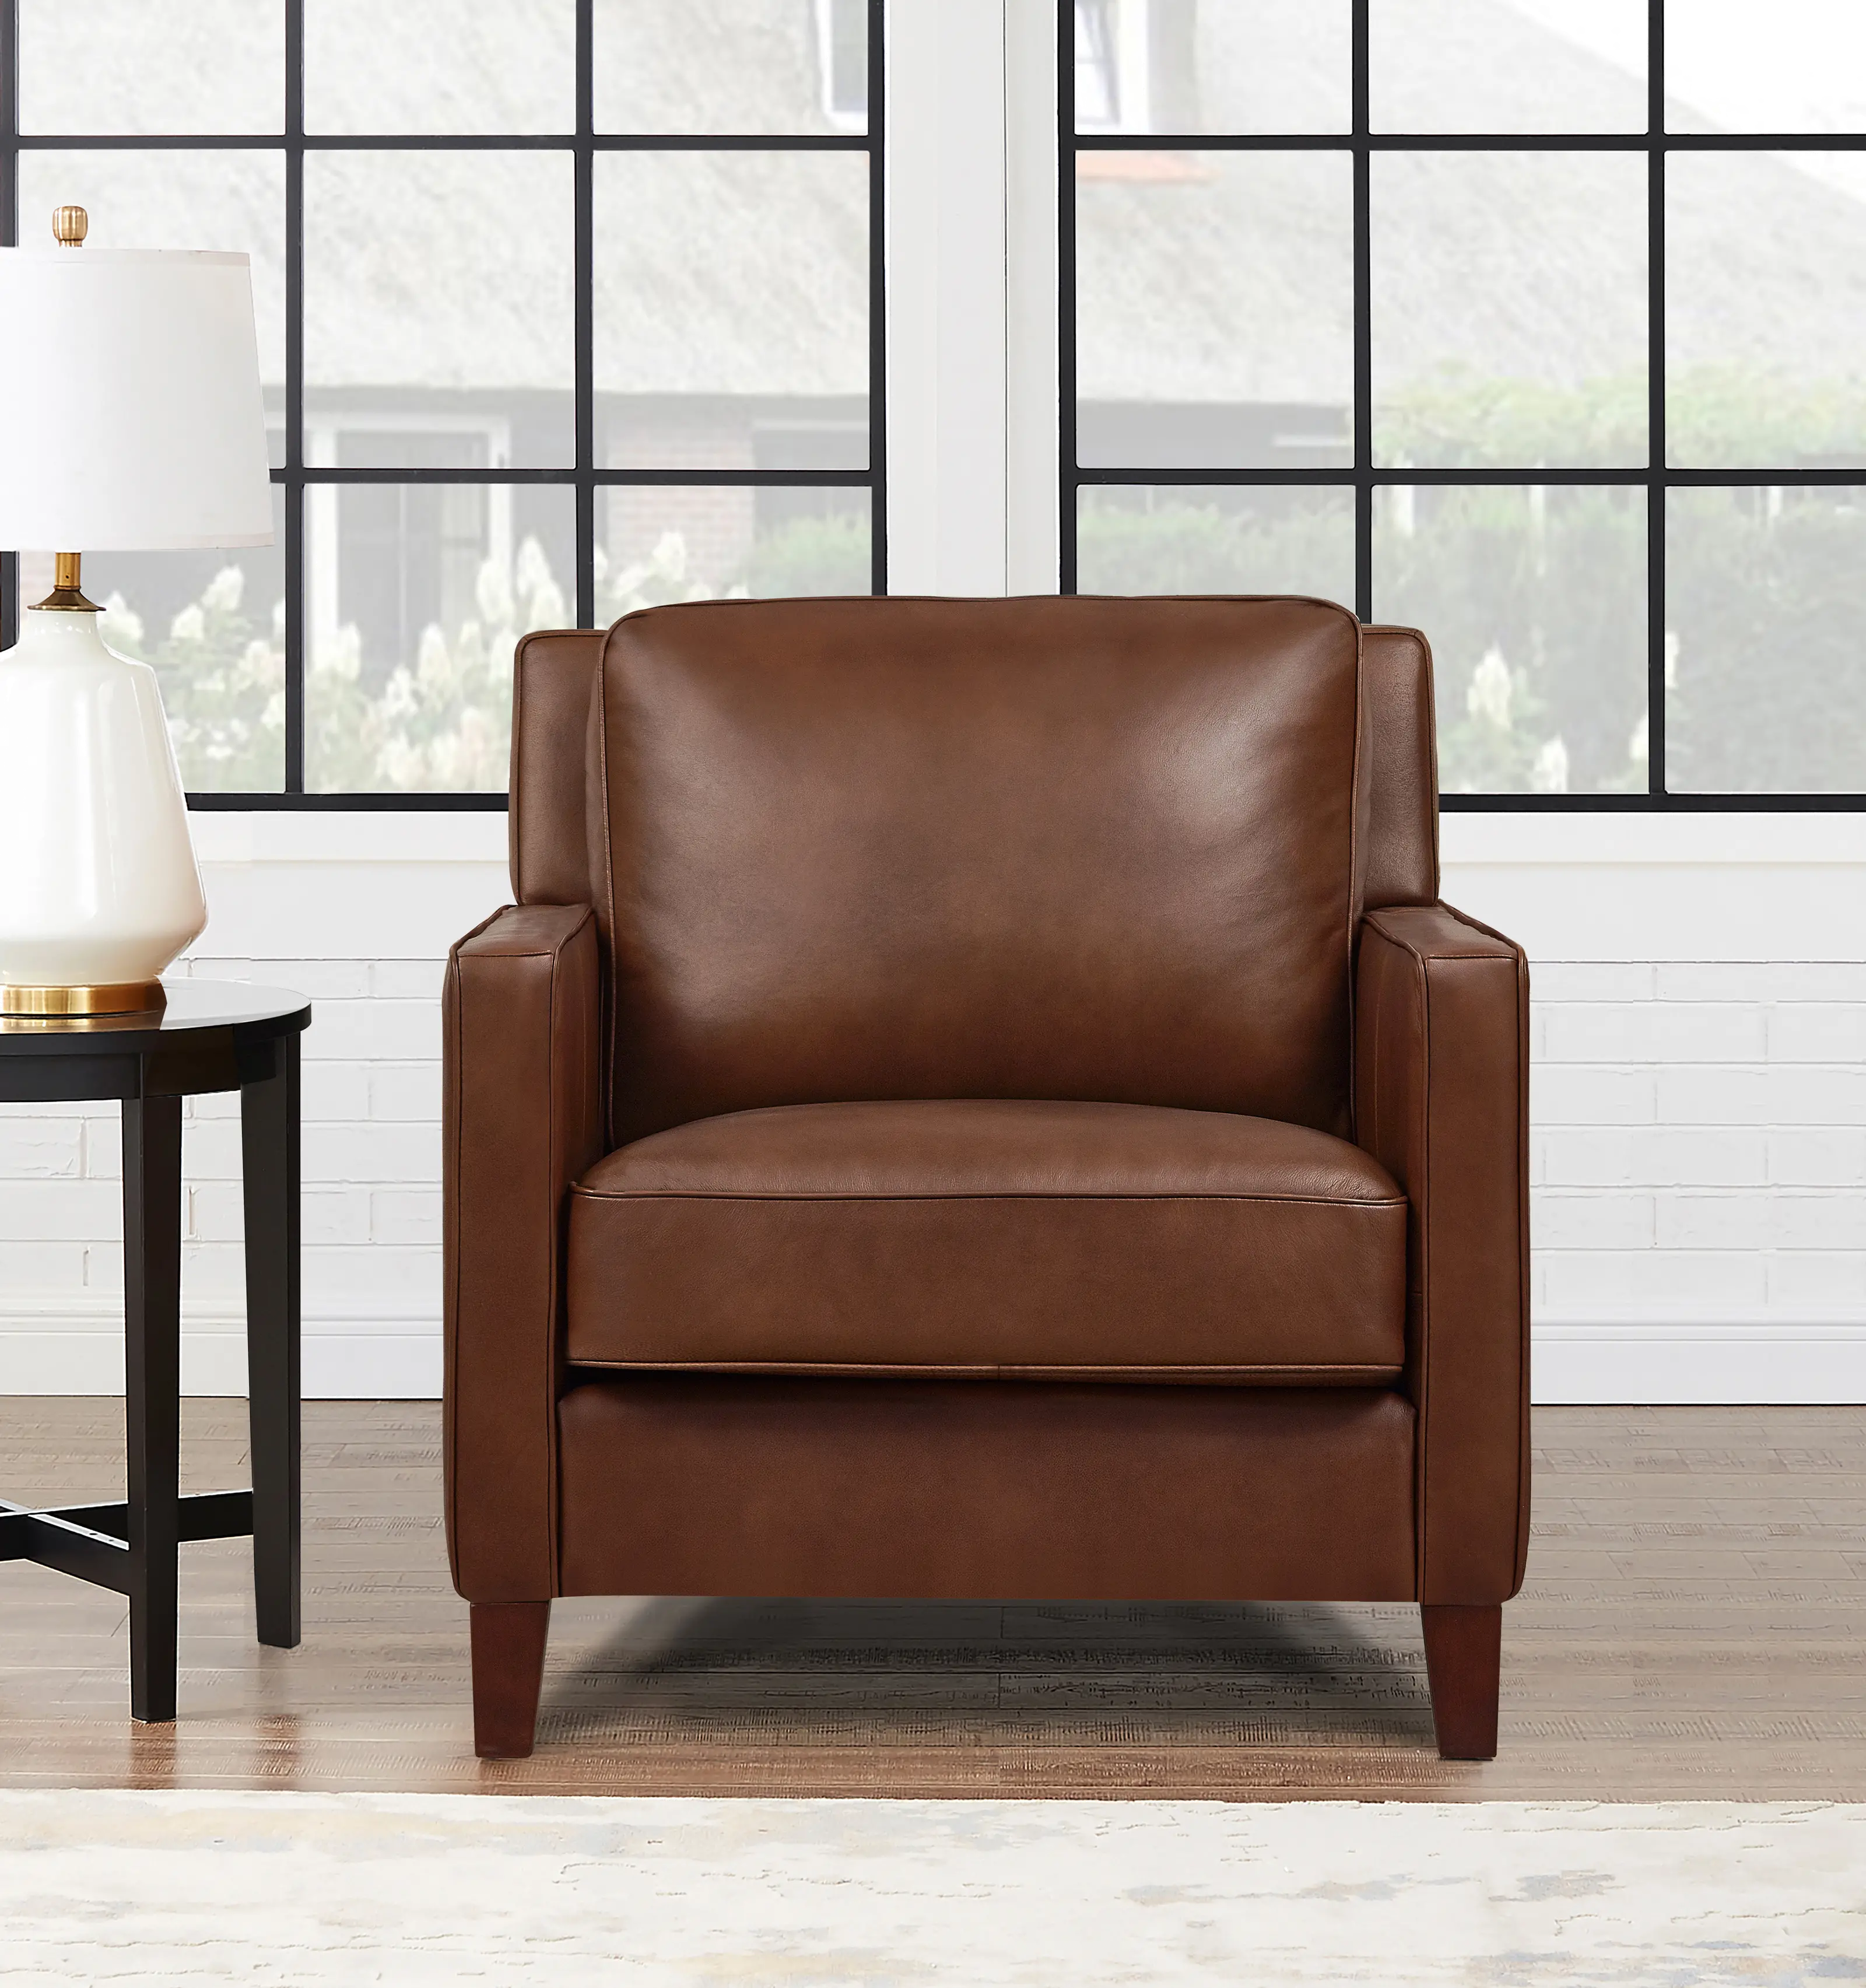 New Haven Contemporary Tobacco Brown Leather Chair